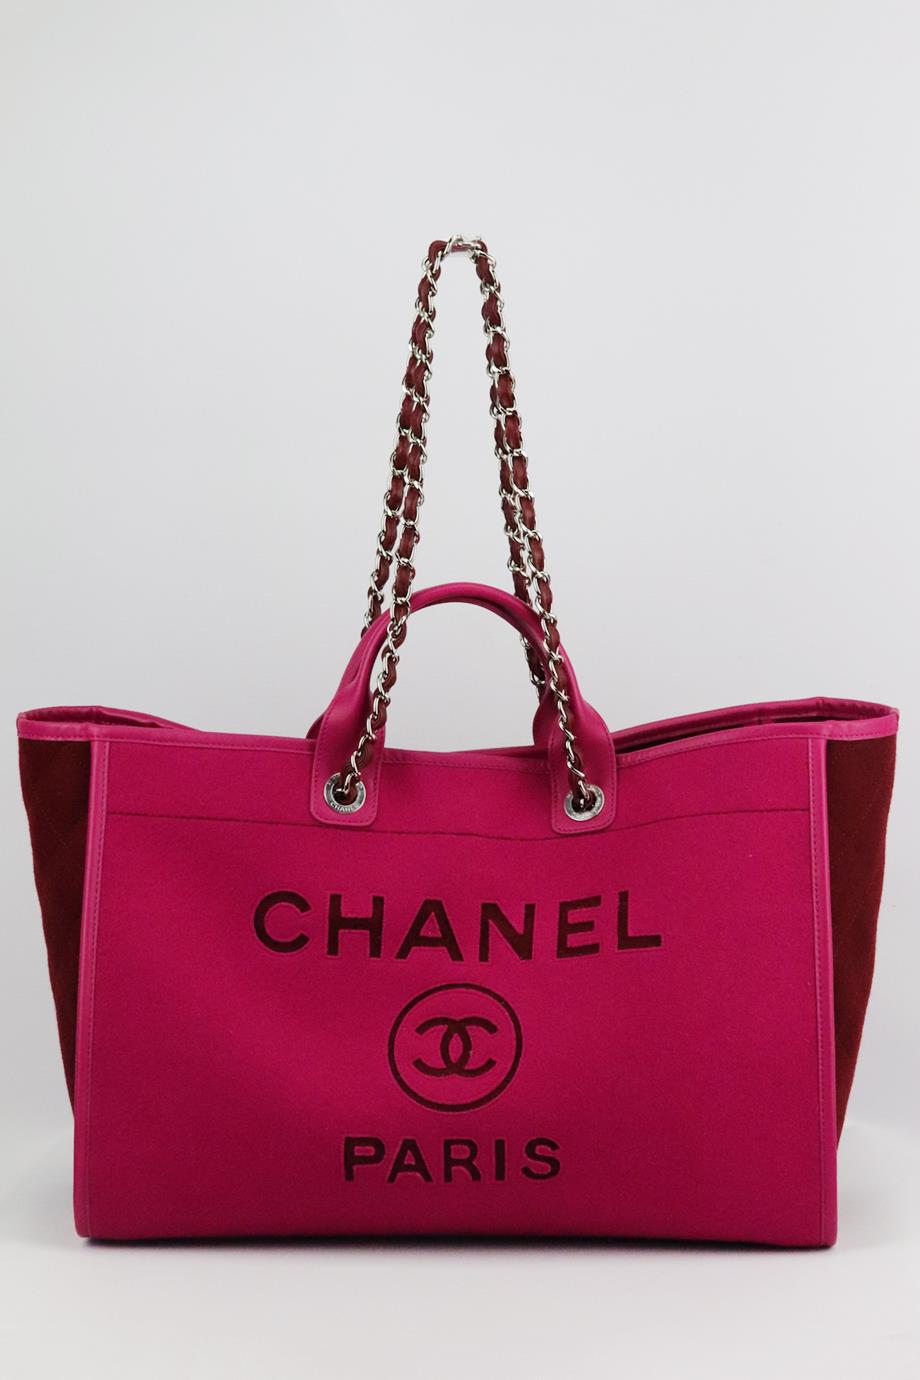 Chanel Deauville Tote Bag, Large, Pink Tweed, Shiny Gold Hardware, Preowned  - No Dustbag - Julia Rose Boston